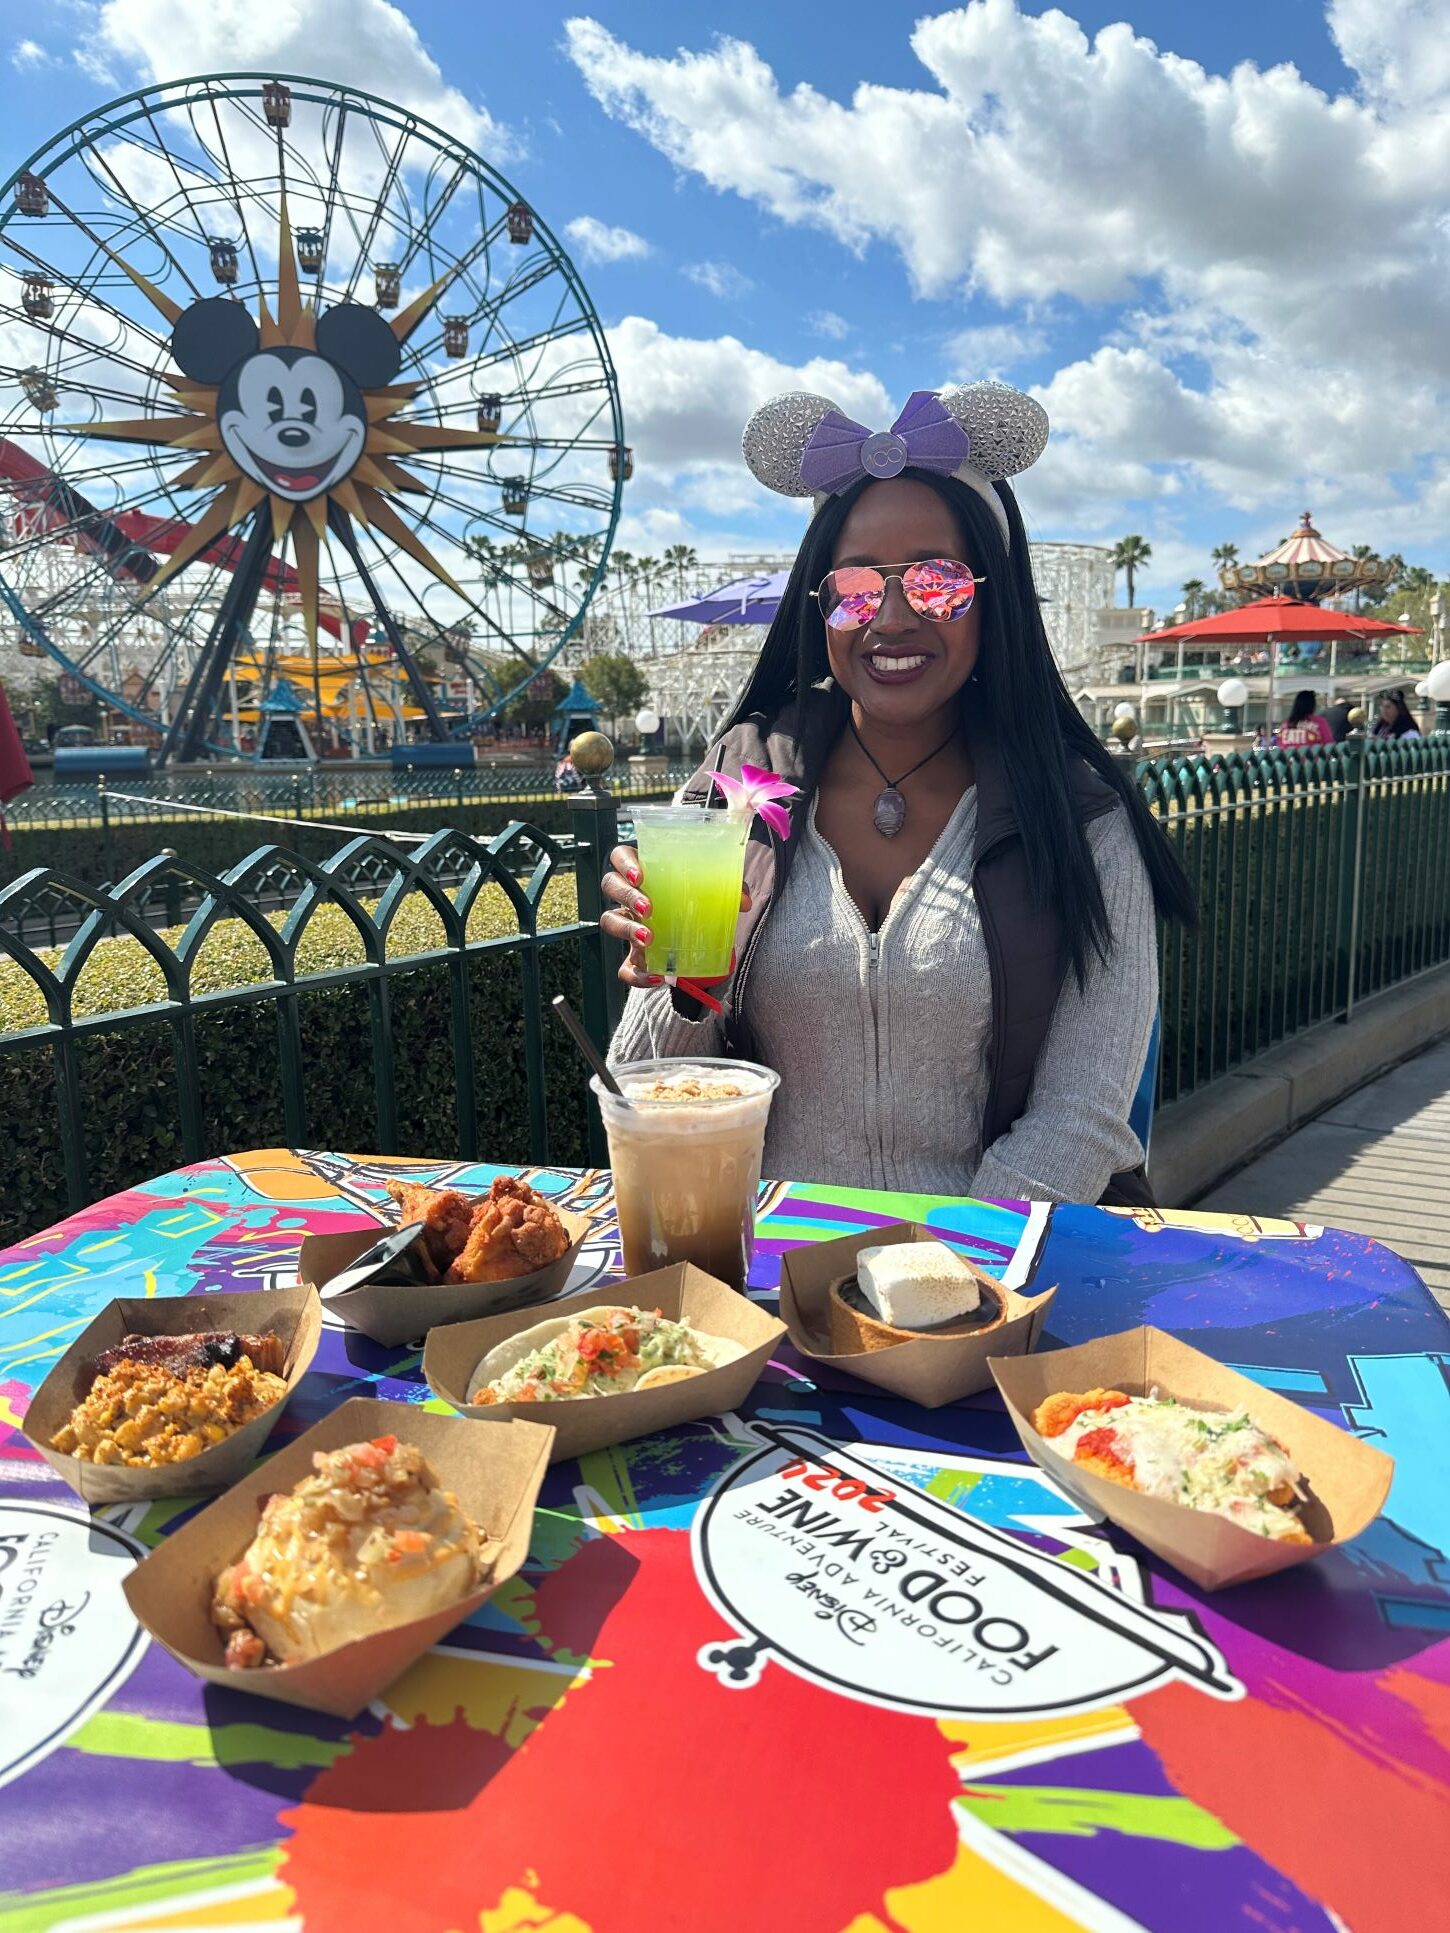 An image of Lifestyle blogger Ariel at the Disney California Adventure Food & Wine Festival.